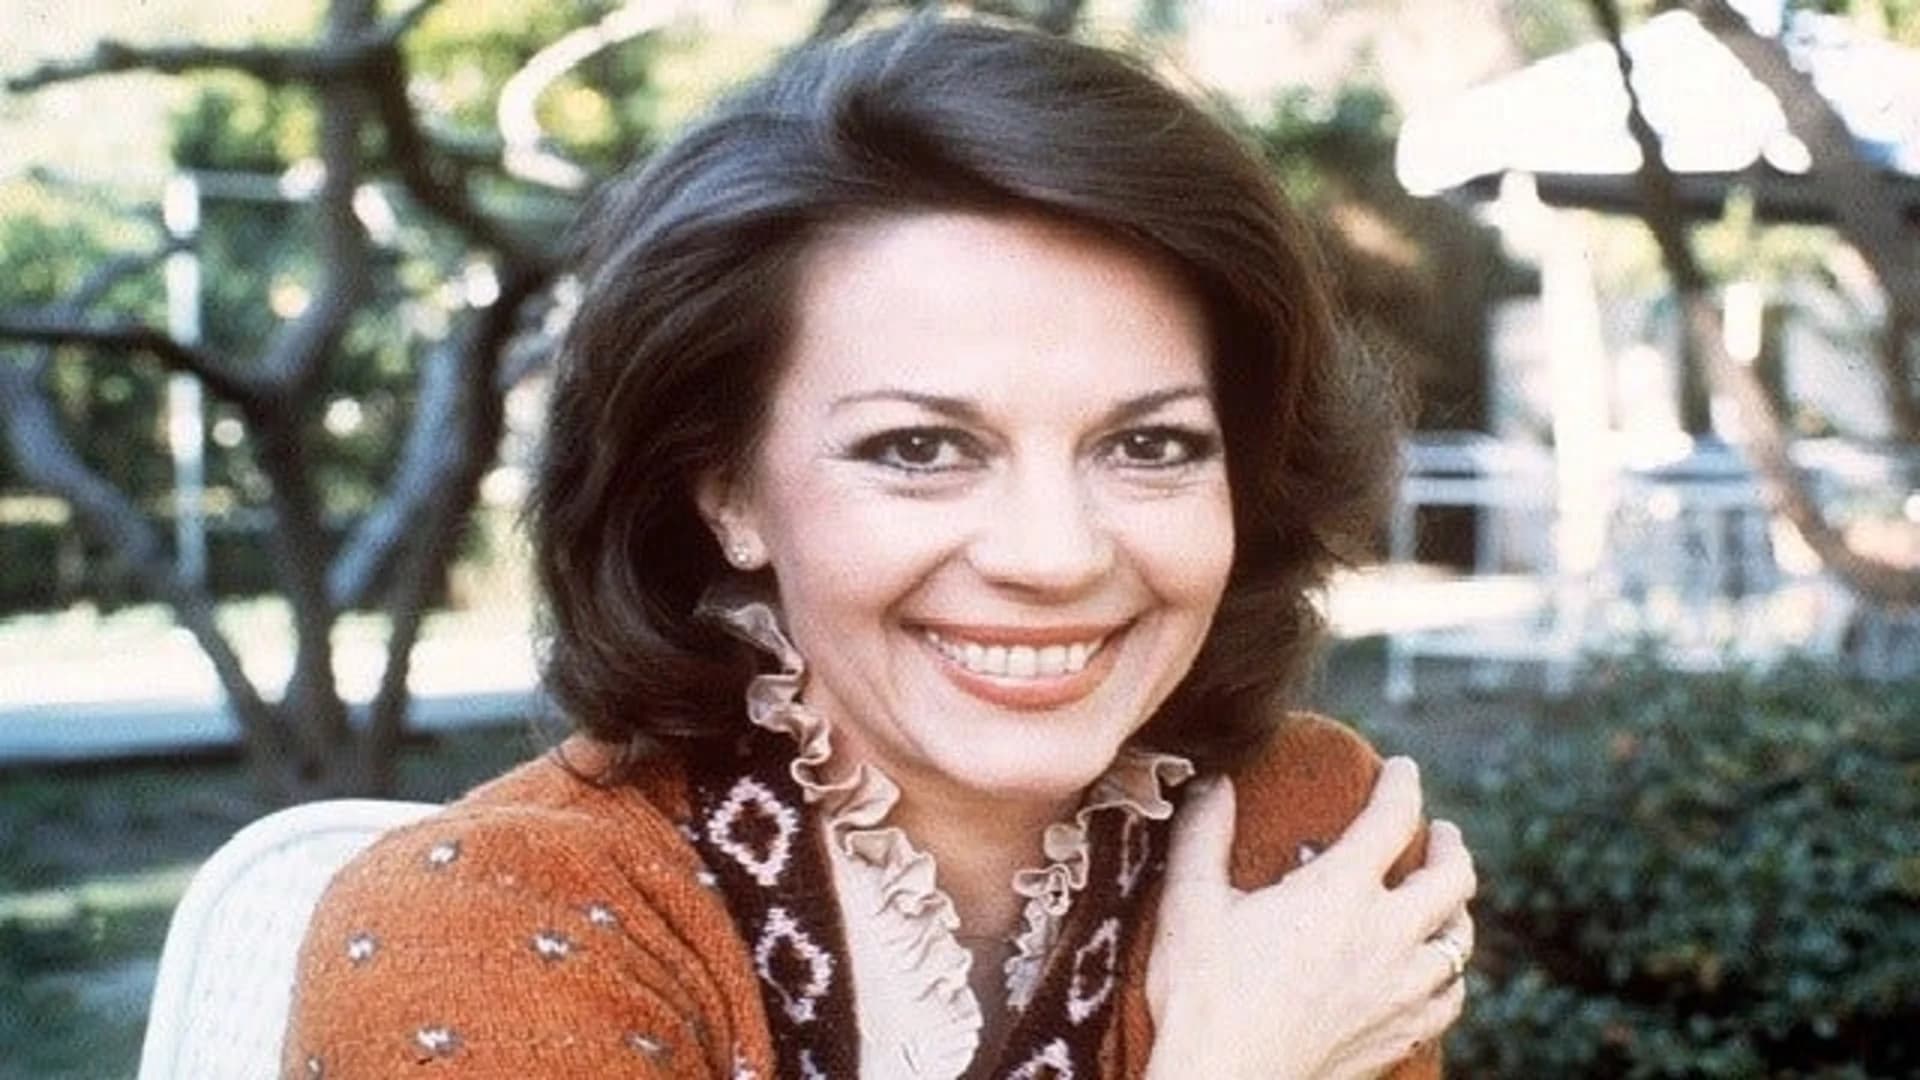 New witnesses emerge in actress Natalie Wood's 1981 drowning